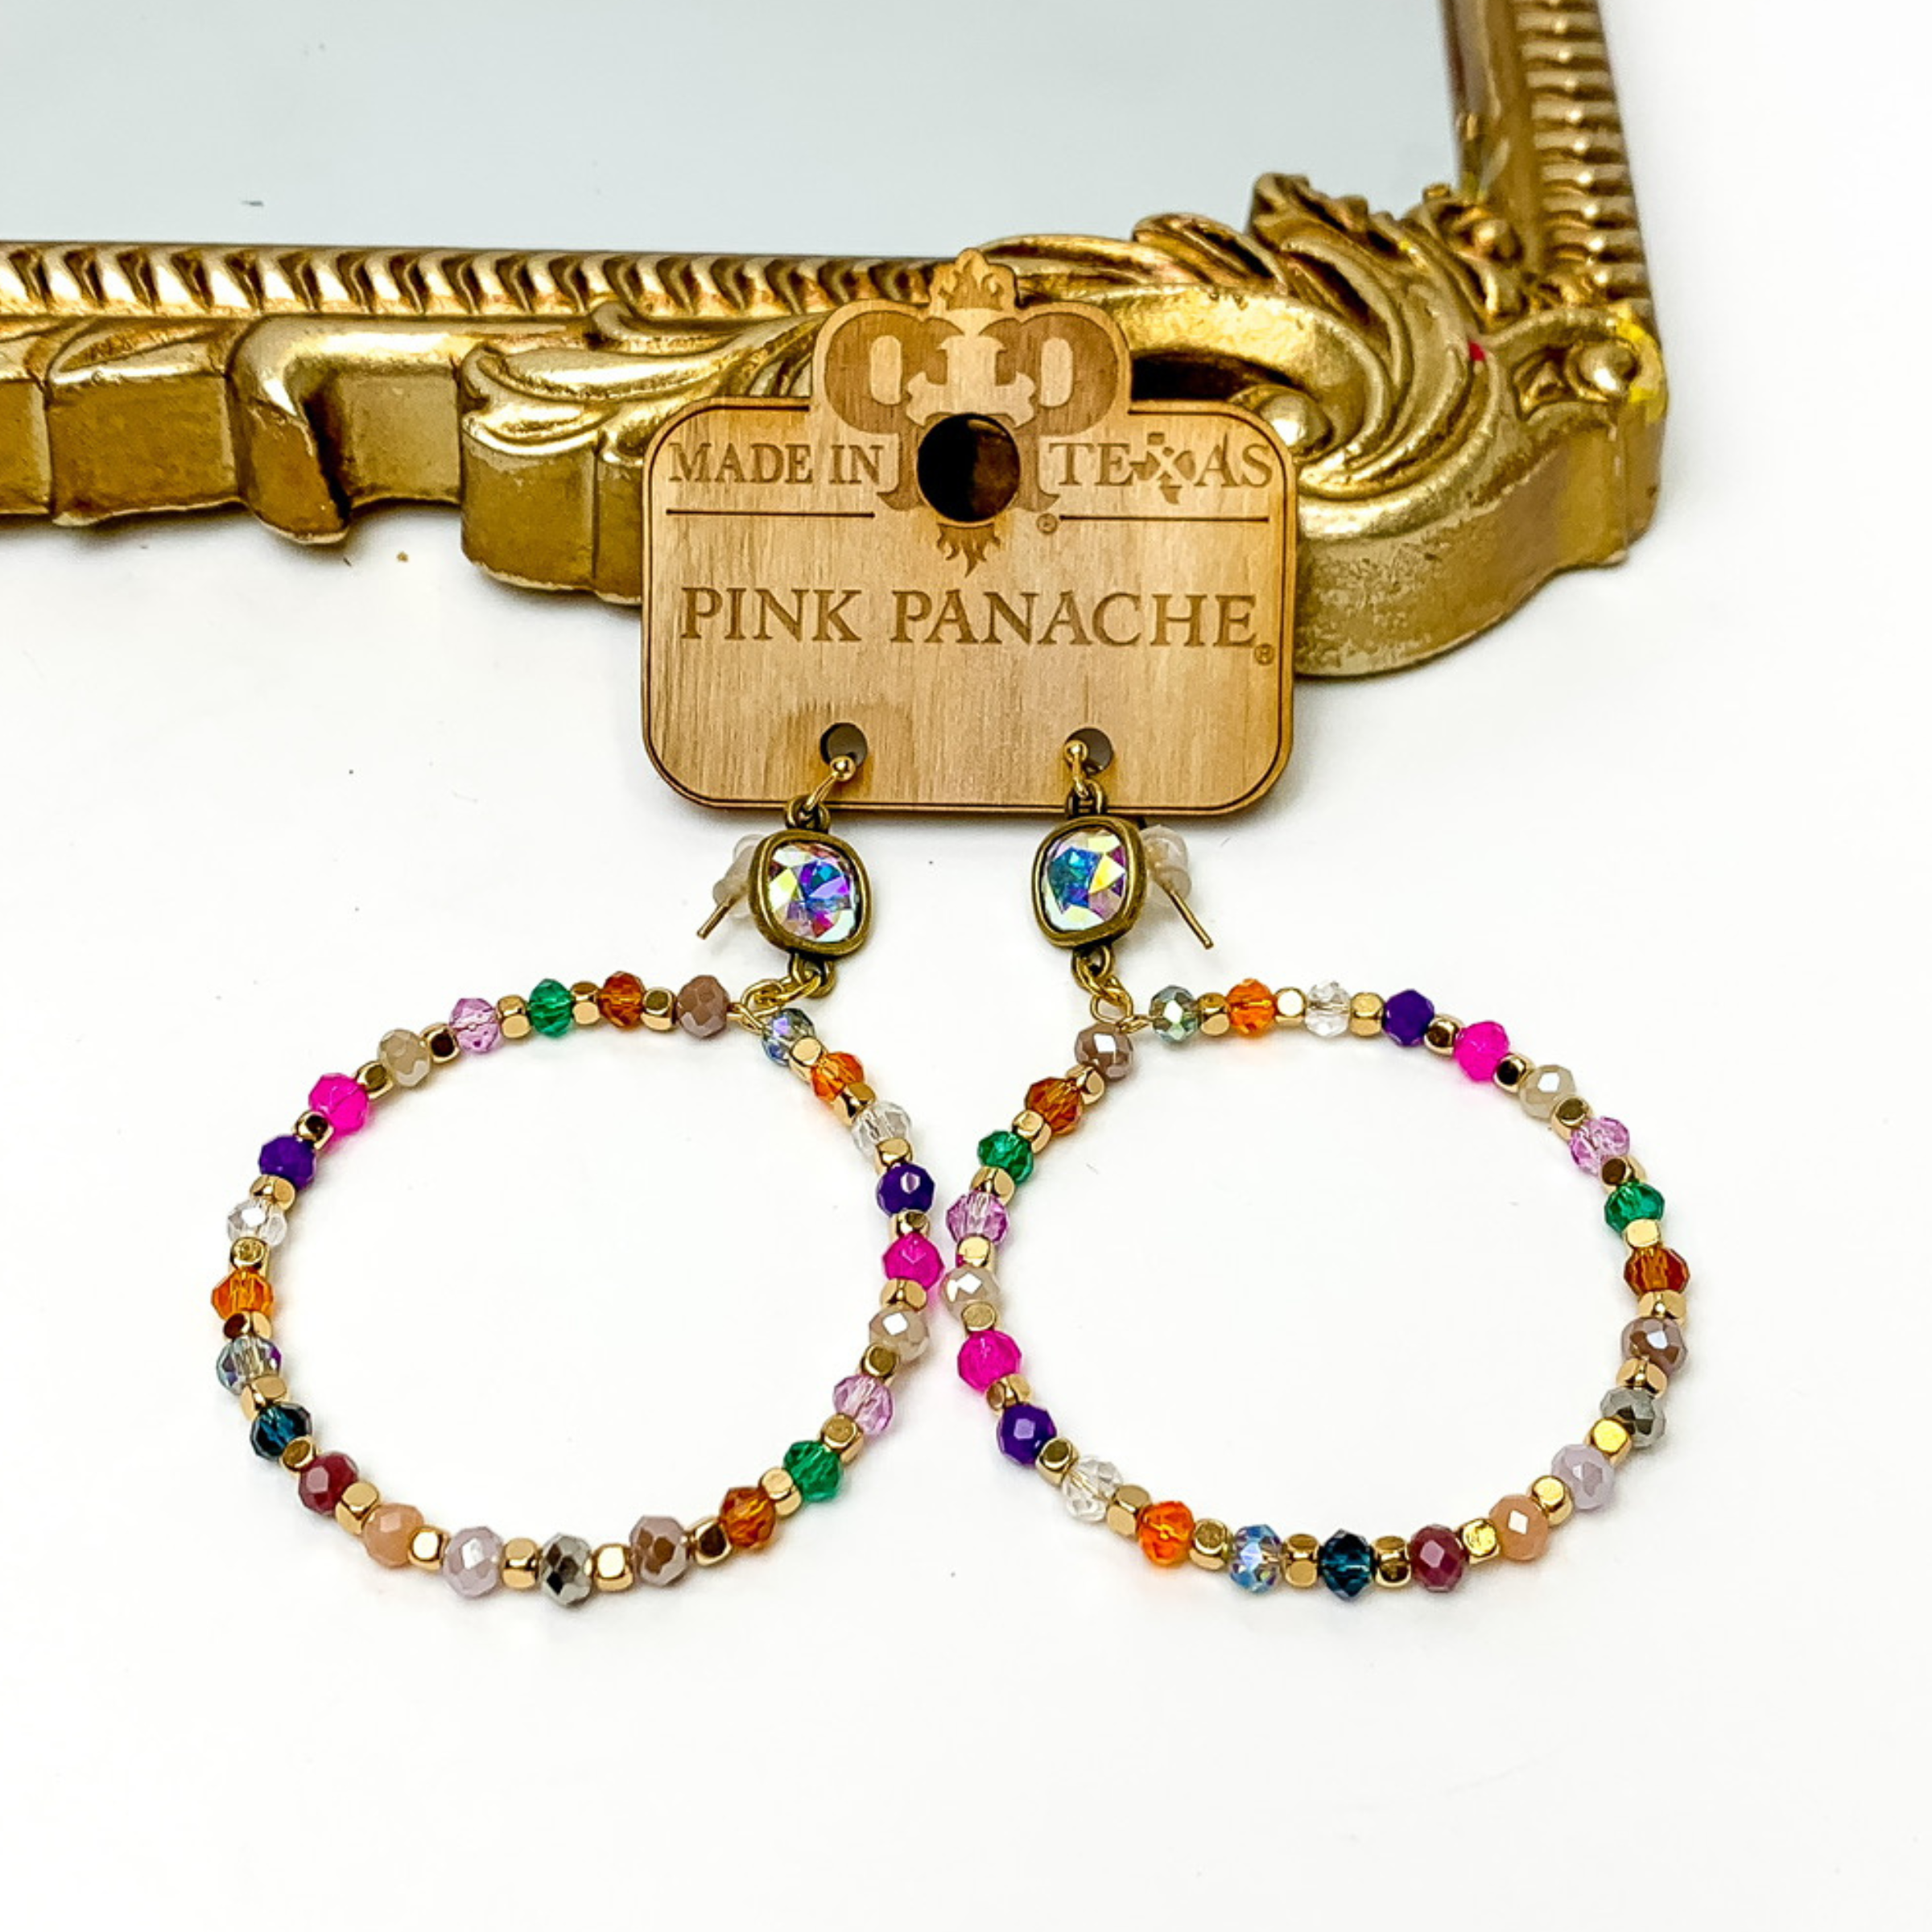 AB cushion cut crystal drop earrings with a multicolored, beaded circle pendant. These earrings are pictured on a Pink Panache wood holder in front of a gold mirror and on a white background. 